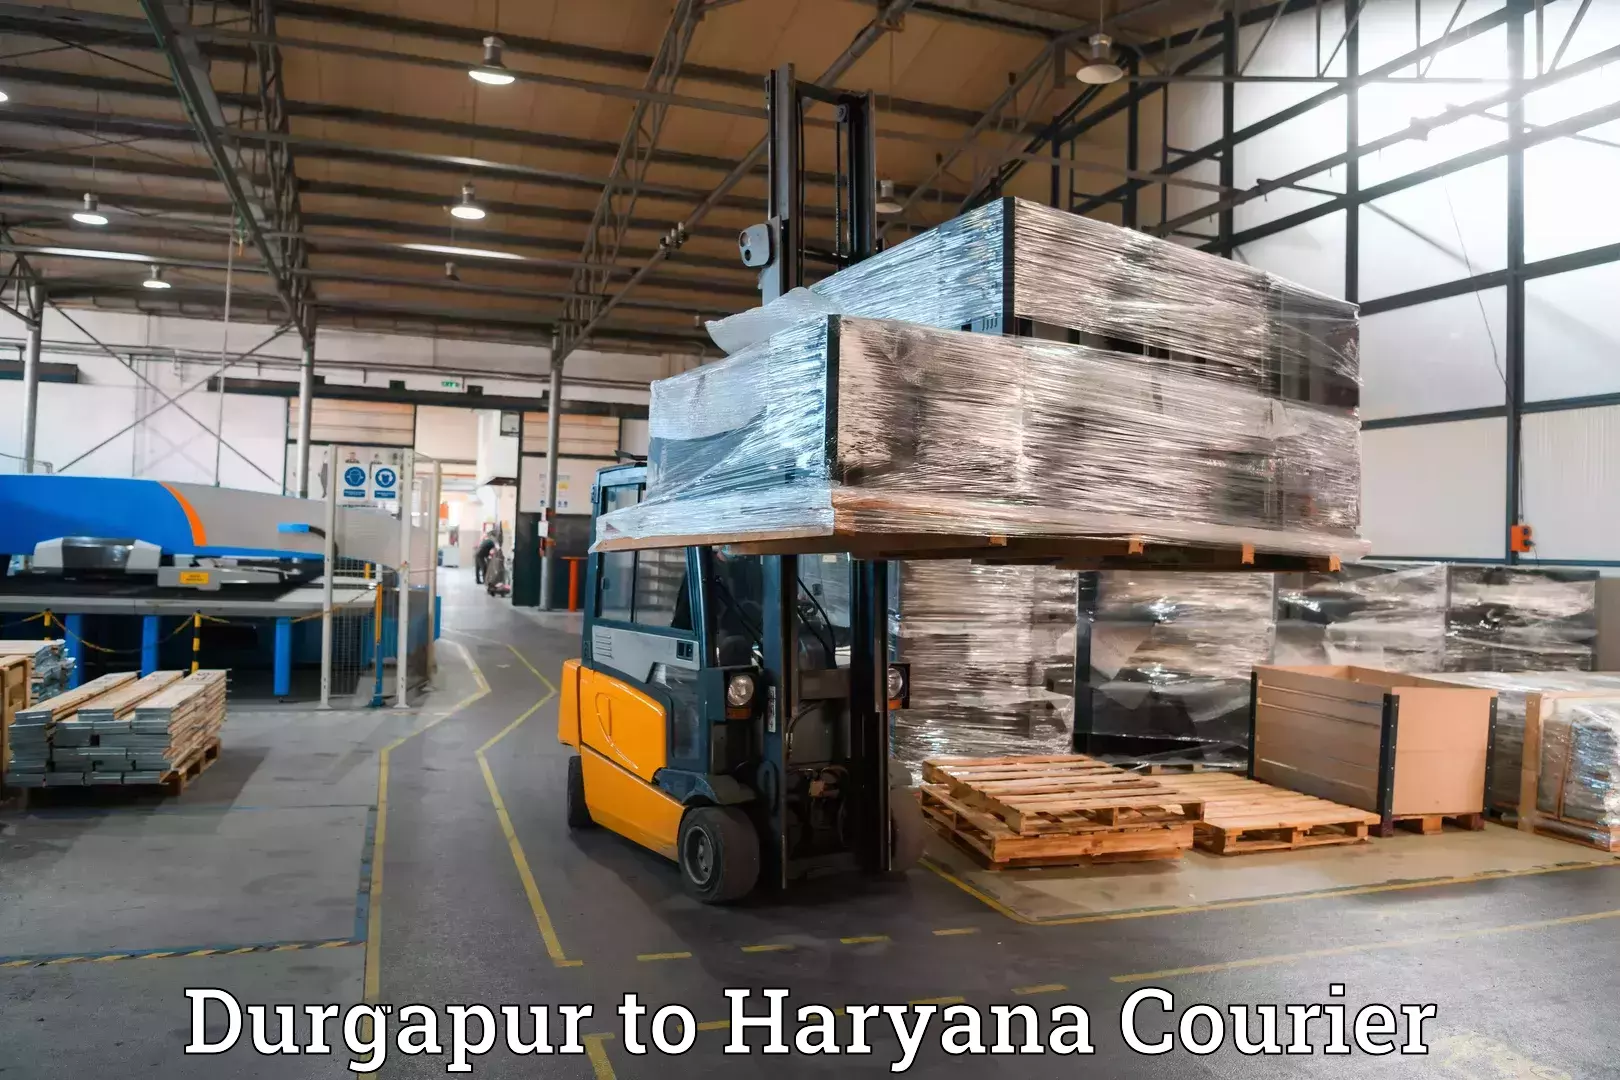 Luggage transport consulting Durgapur to Faridabad